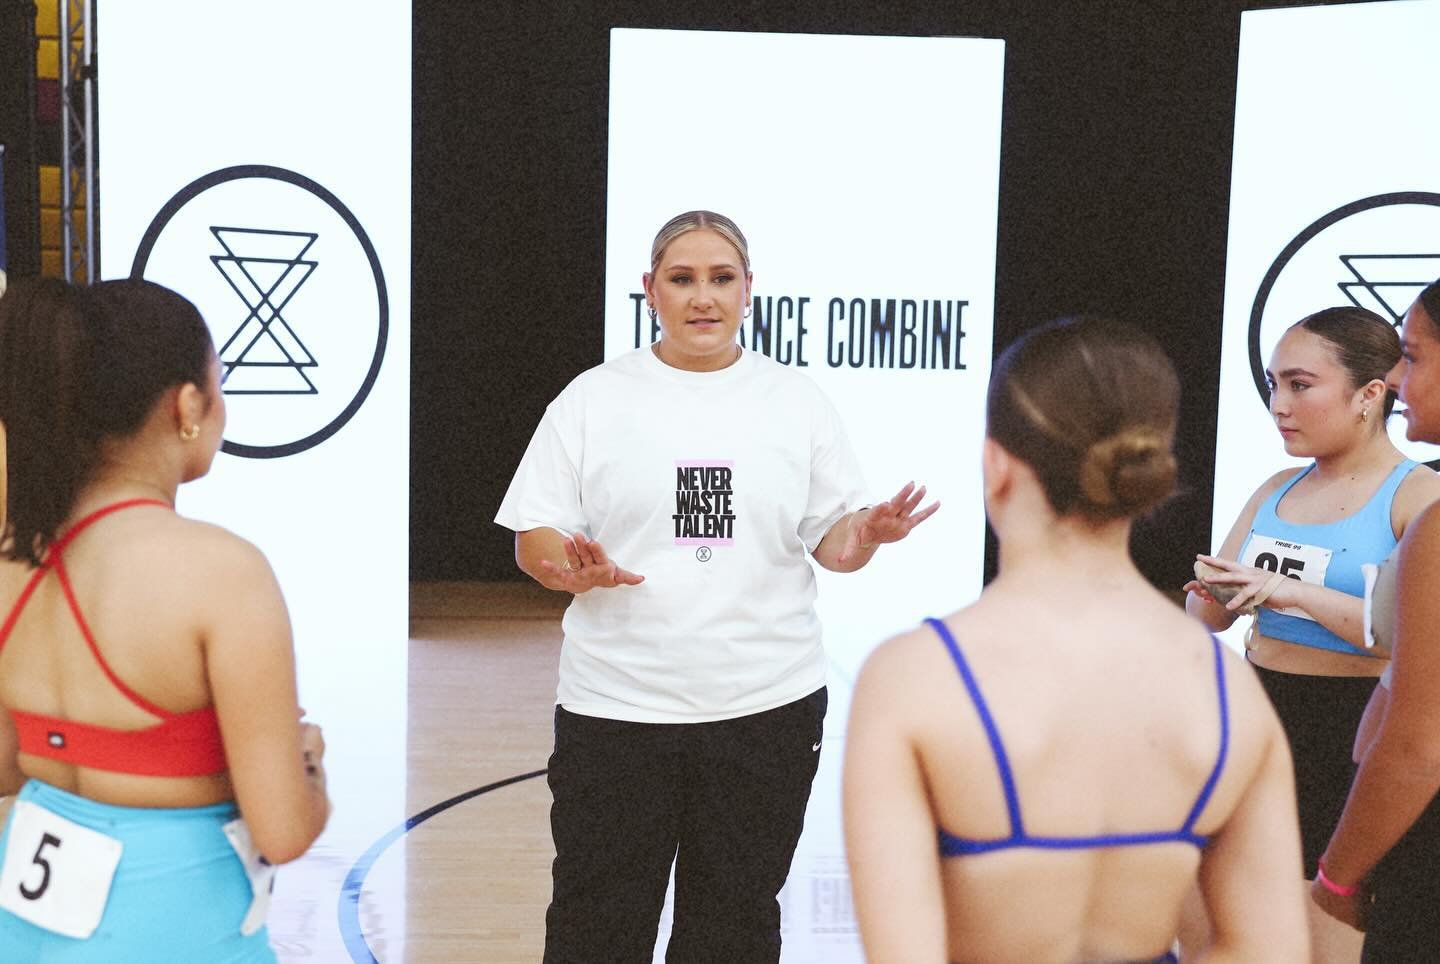 It&rsquo;s the FINAL DAY of THE DANCE COMBINE 2024 ⚡️

We are heading into our combo showcase and cannot wait to see the fire these recruits bring to the dance floor. They have been working so hard! LETS GET IT, TRIBE!

📷 @snappedbydrew